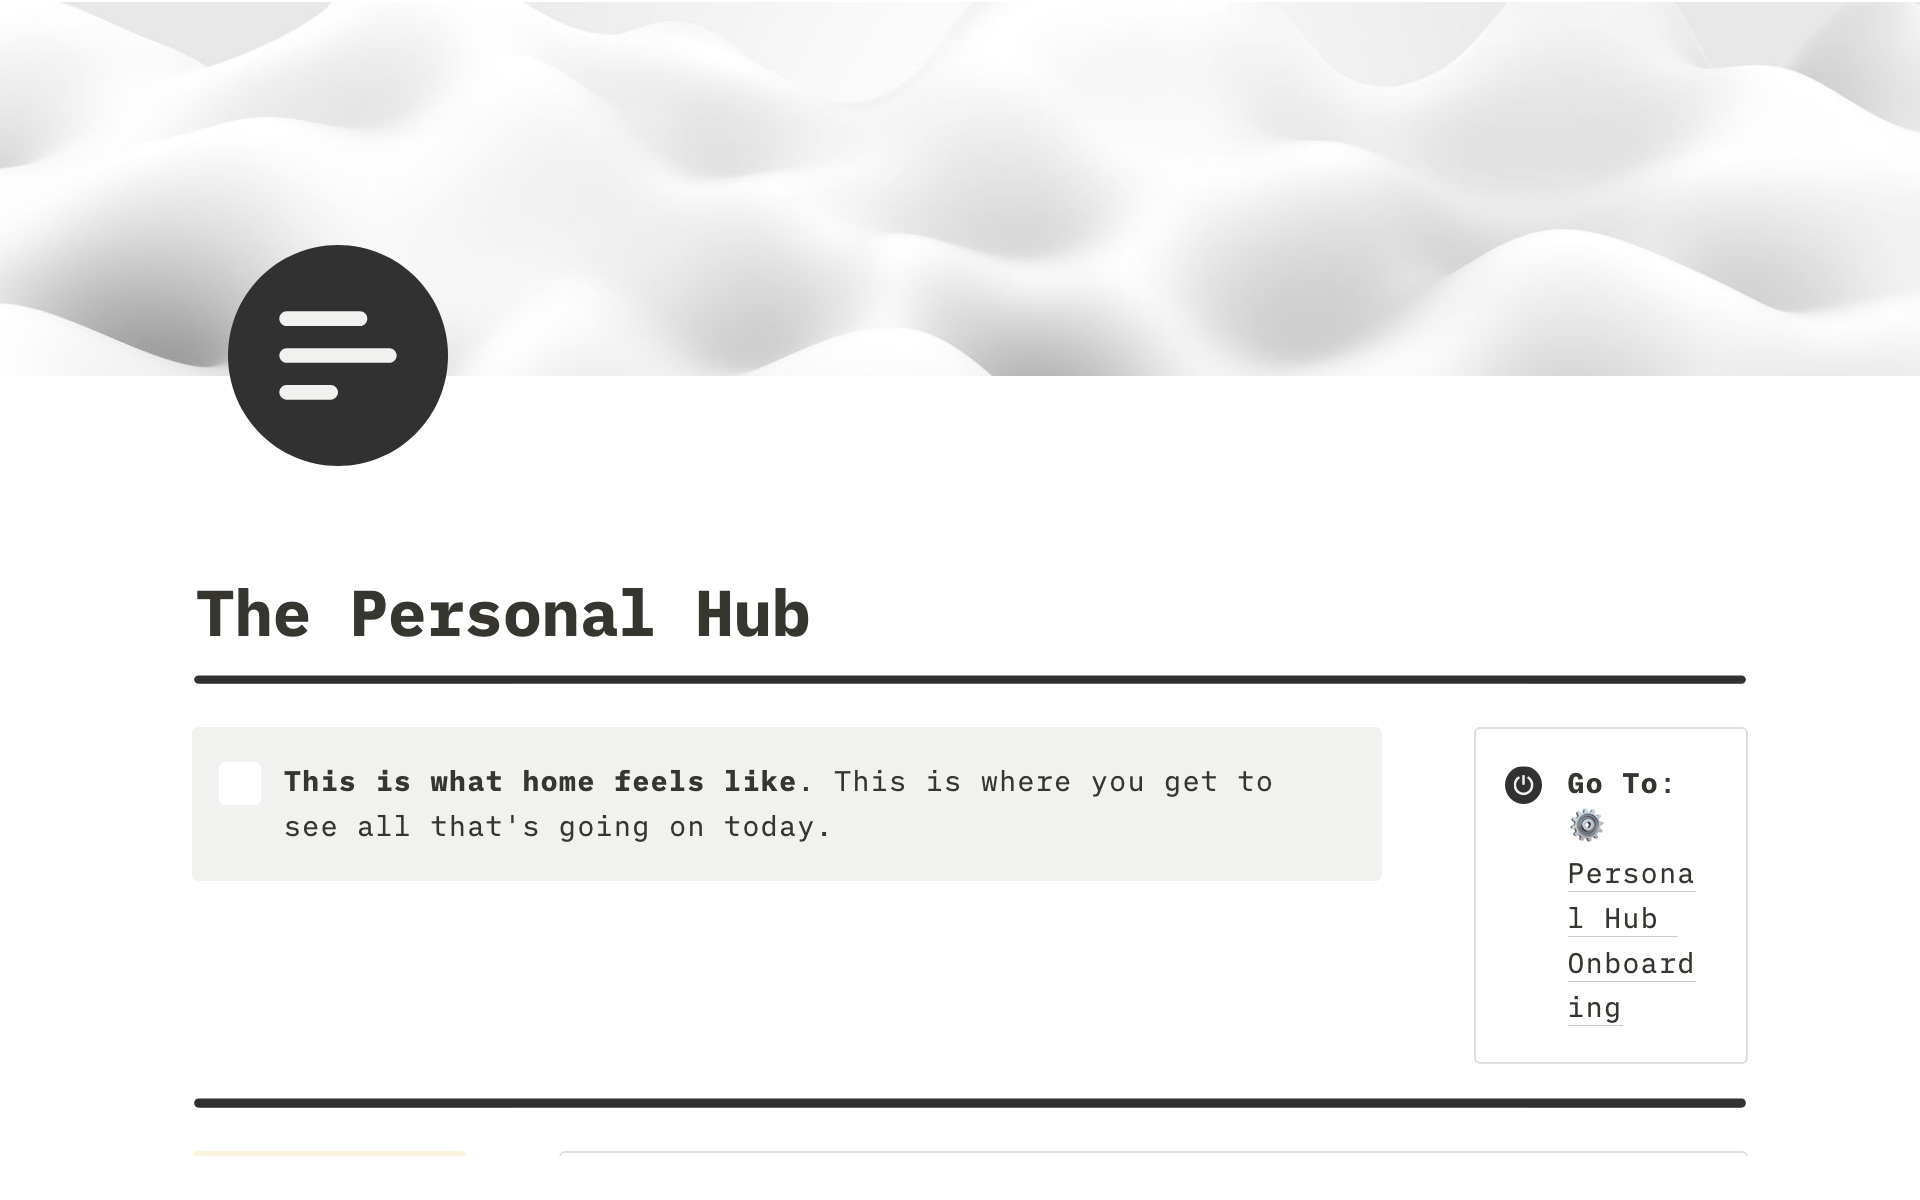 The Personal Hub organizes all your personal data (next actions, notes, projects, dreams, and more), making it easy for you to find what you want/need.